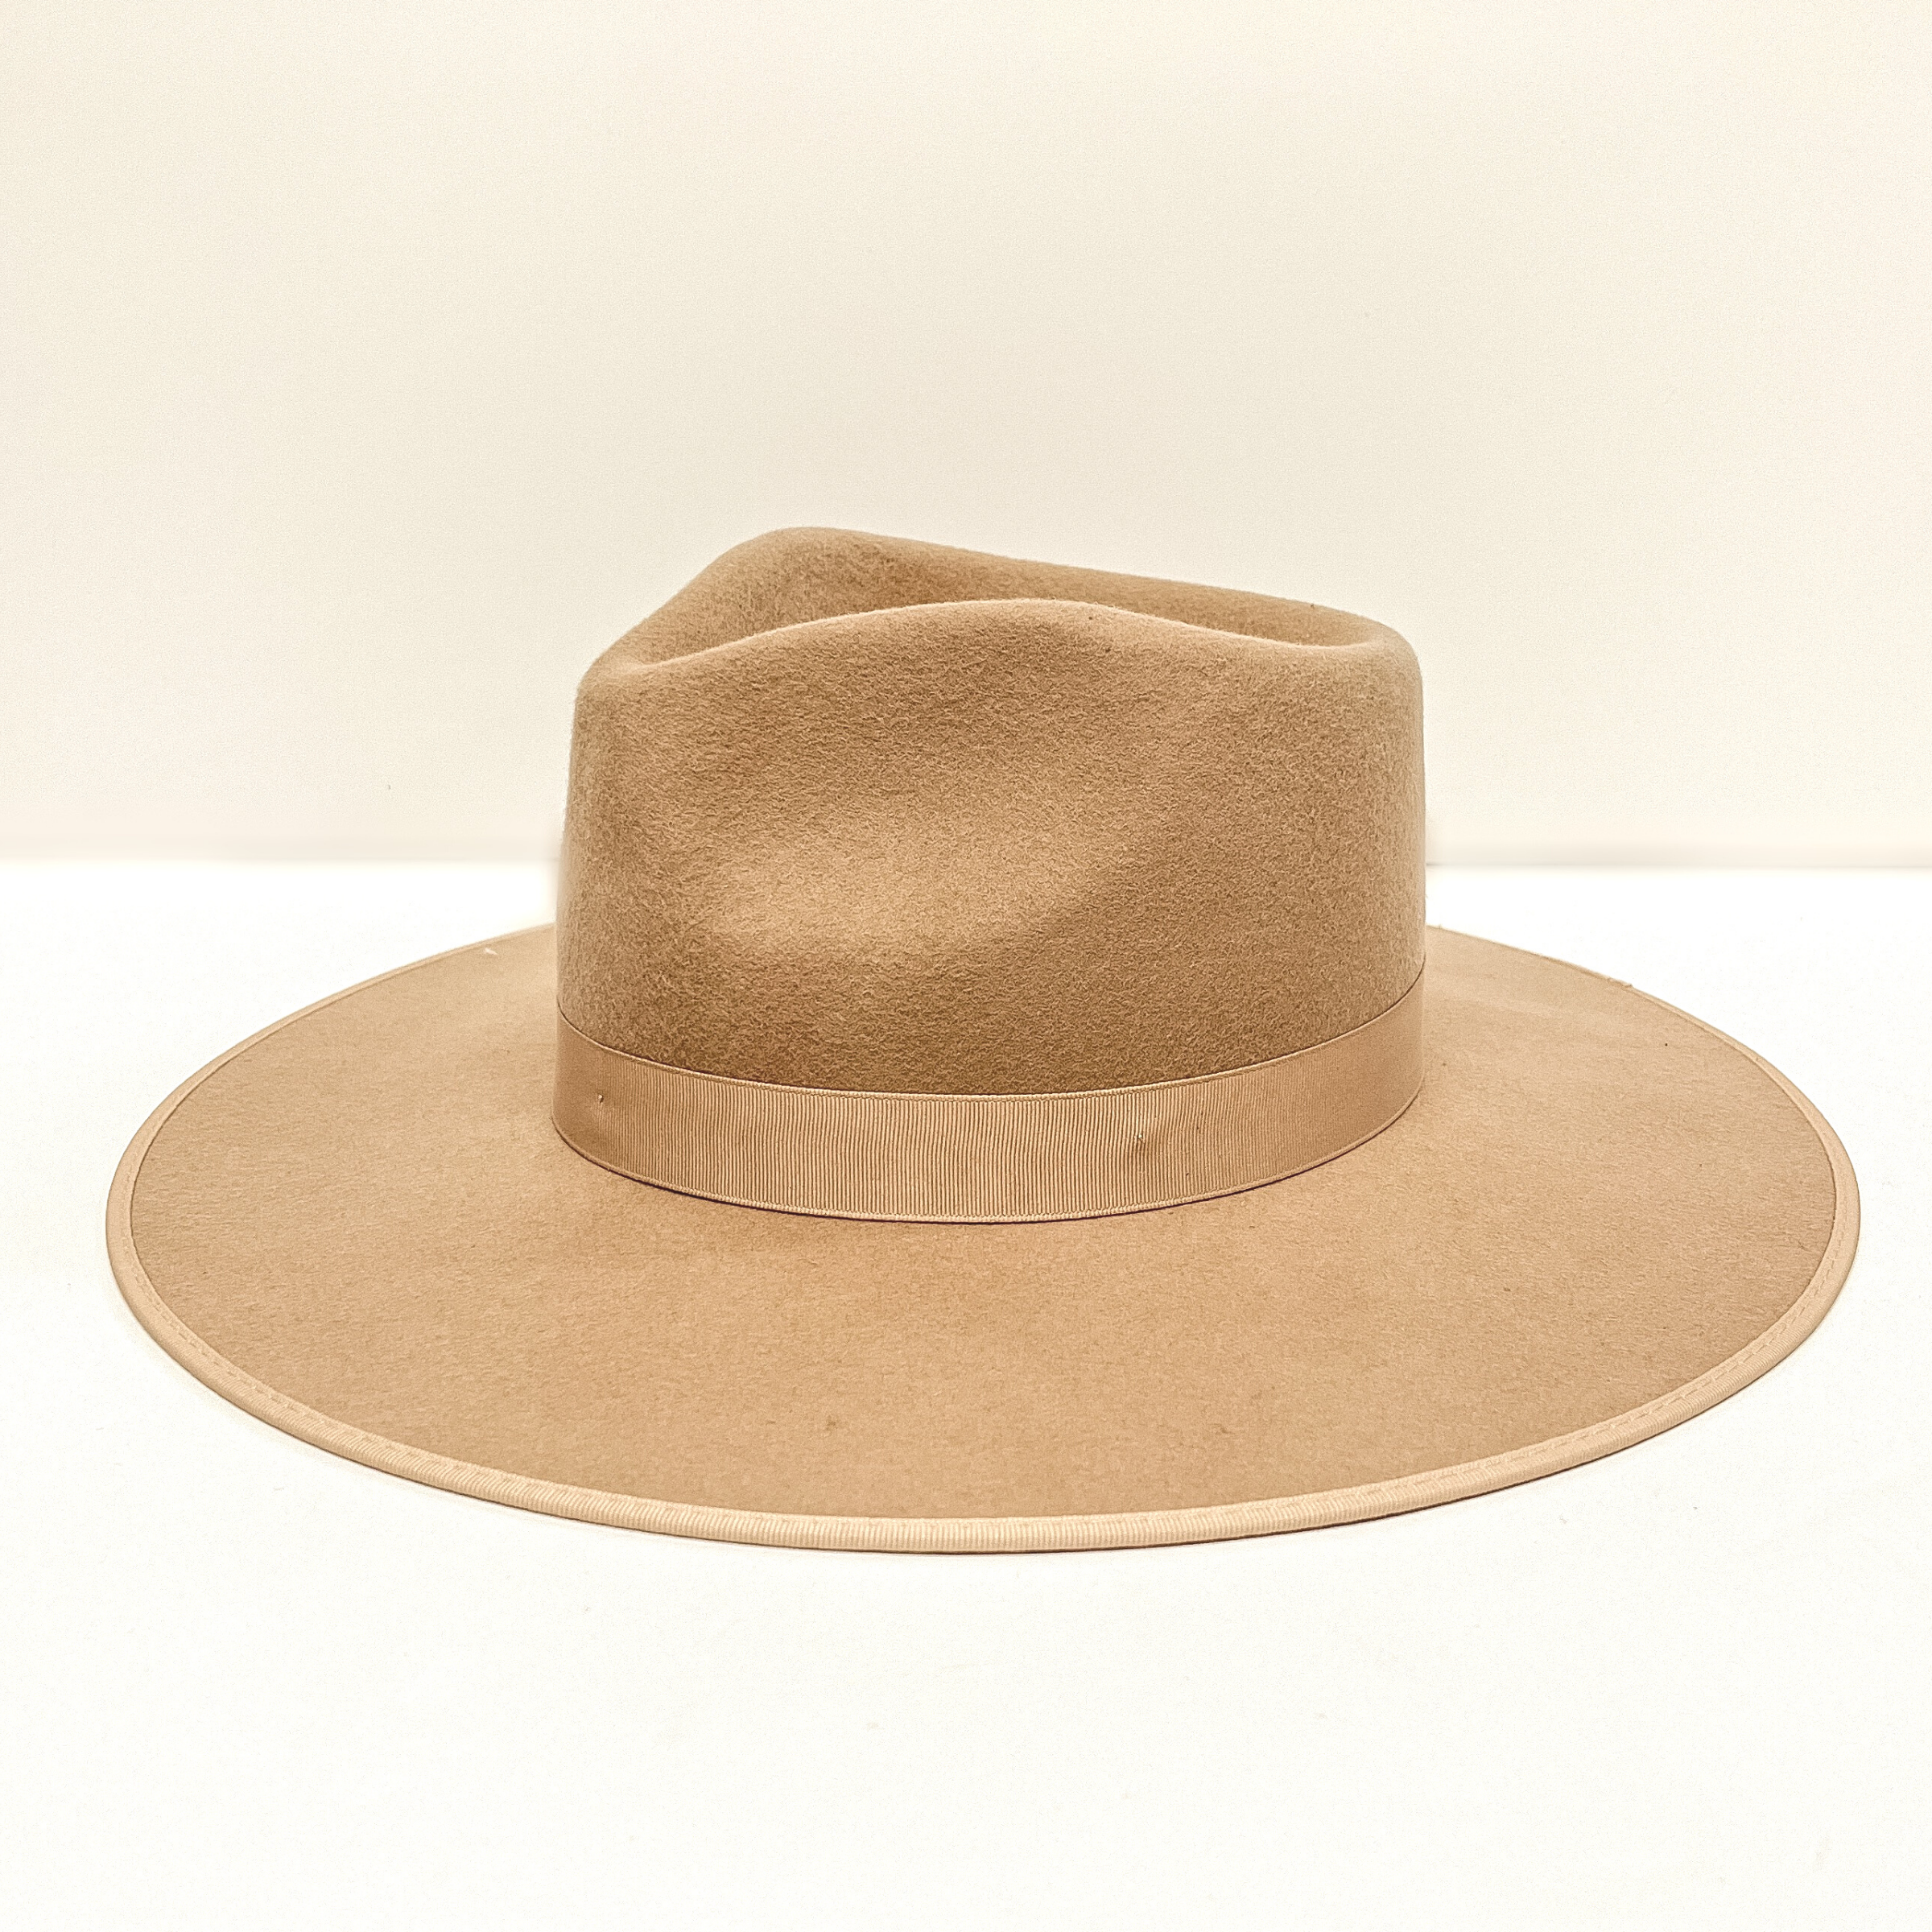 A light brown hat that has a ribbon band pictured on a white background.